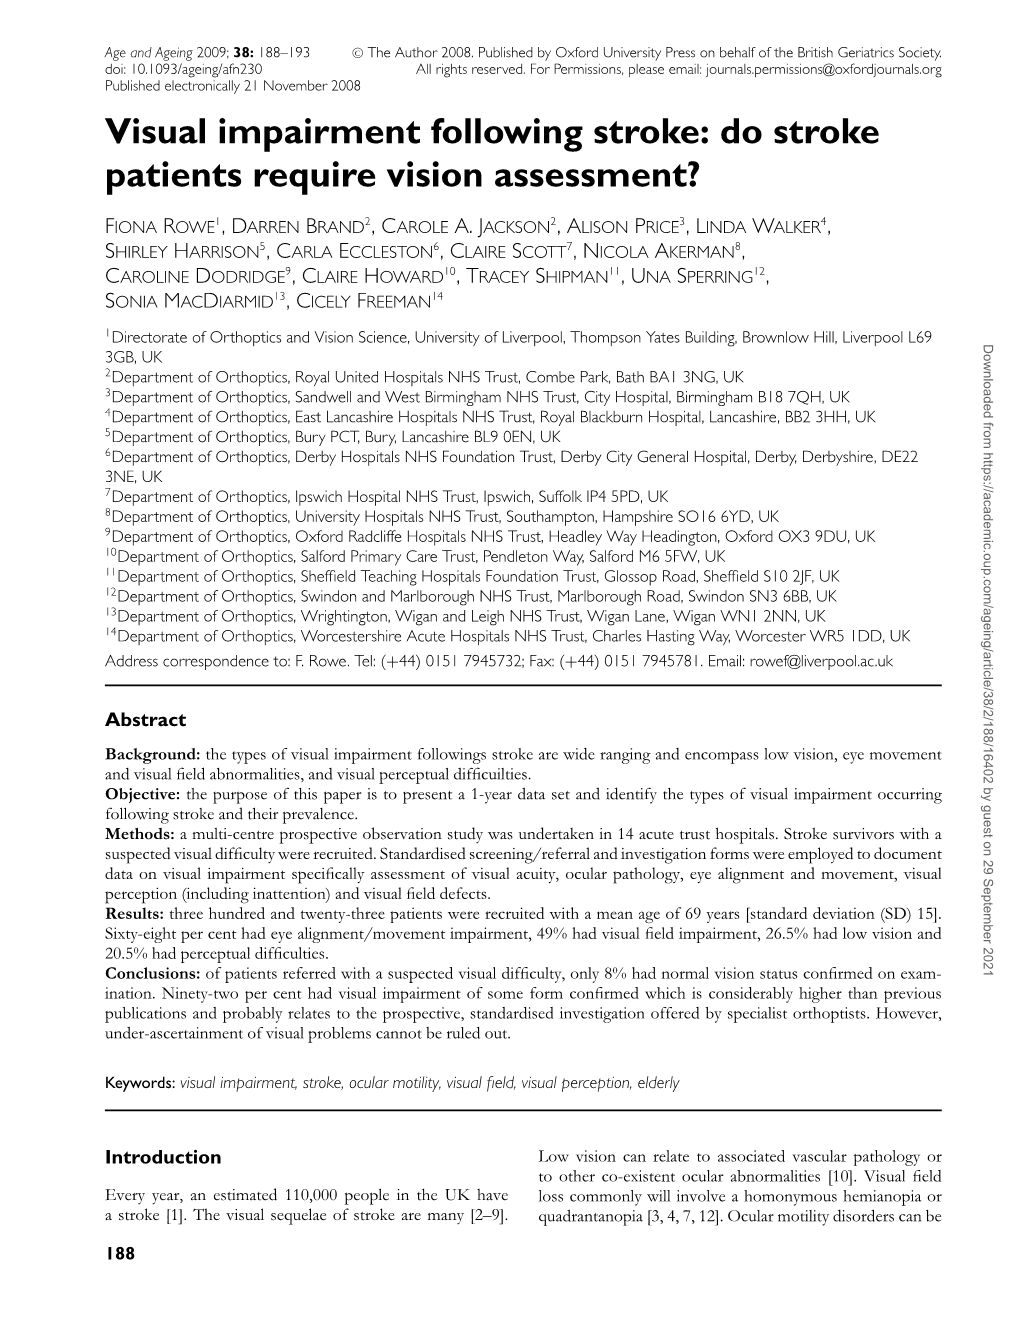 Do Stroke Patients Require Vision Assessment?